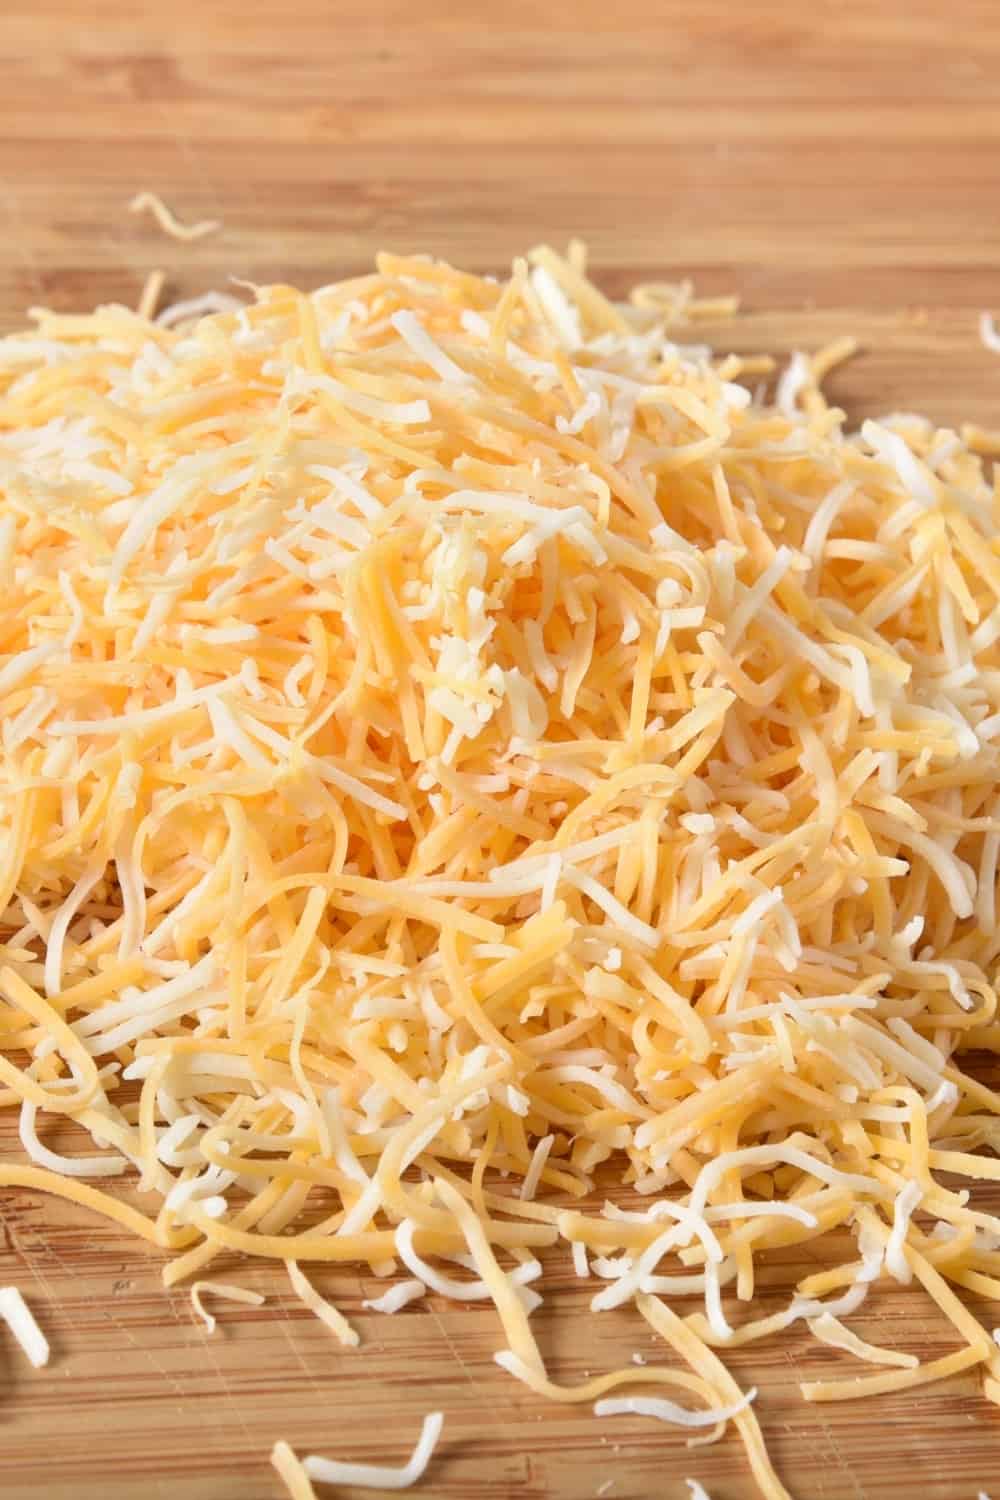 A blend of sharp cheddar, monterey jack, asadero and queso blanco cheeses finely shredded